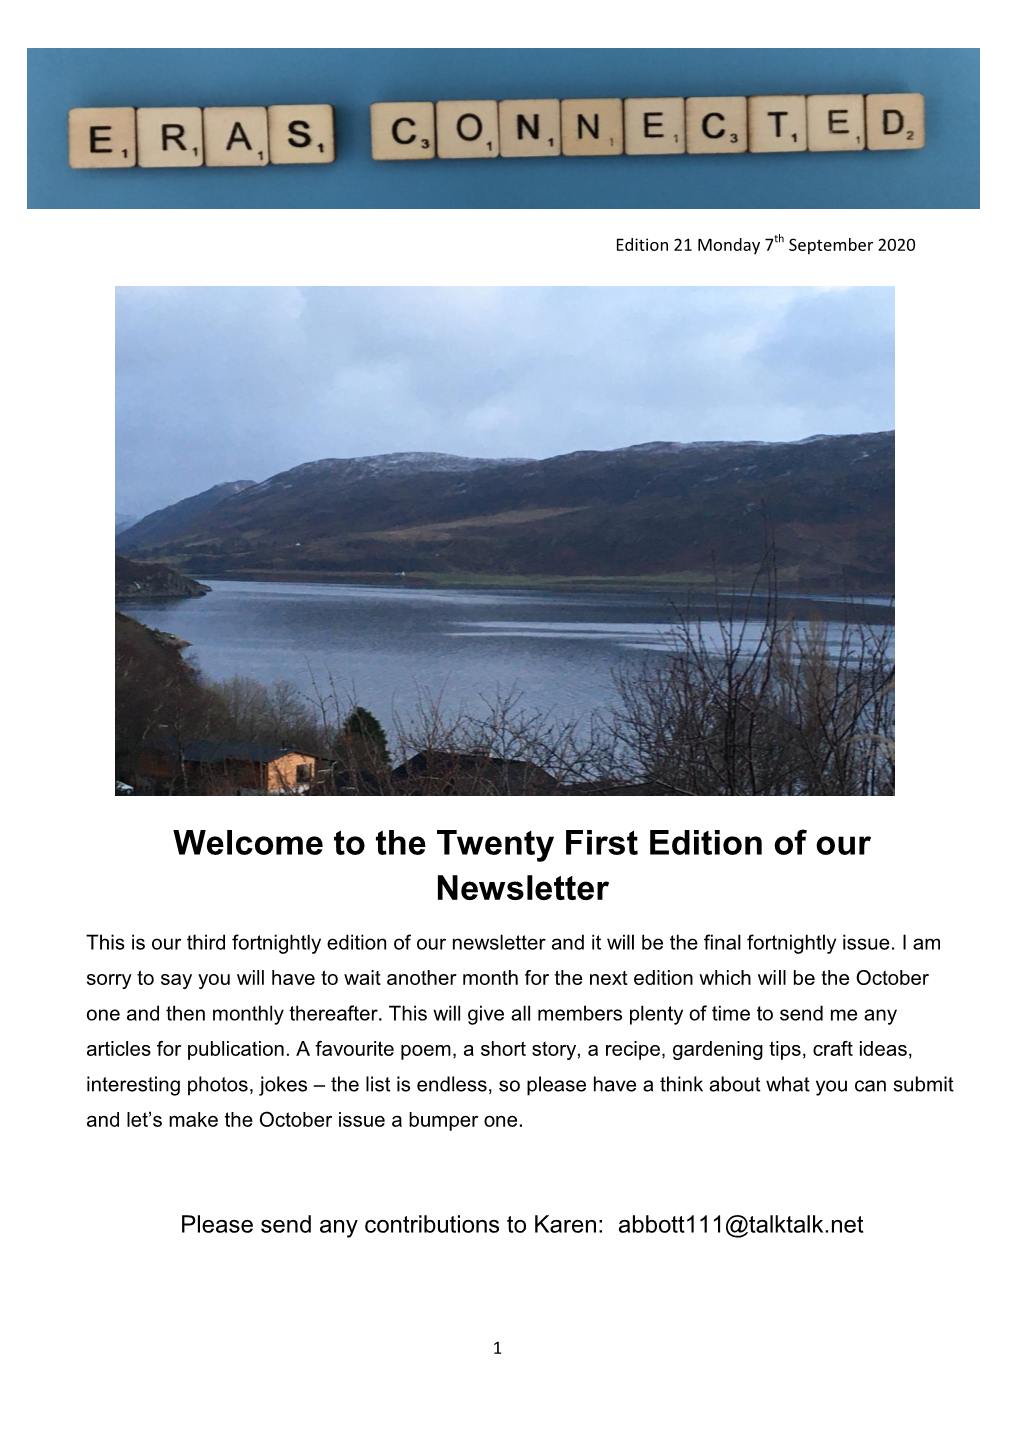 Welcome to the Twenty First Edition of Our Newsletter